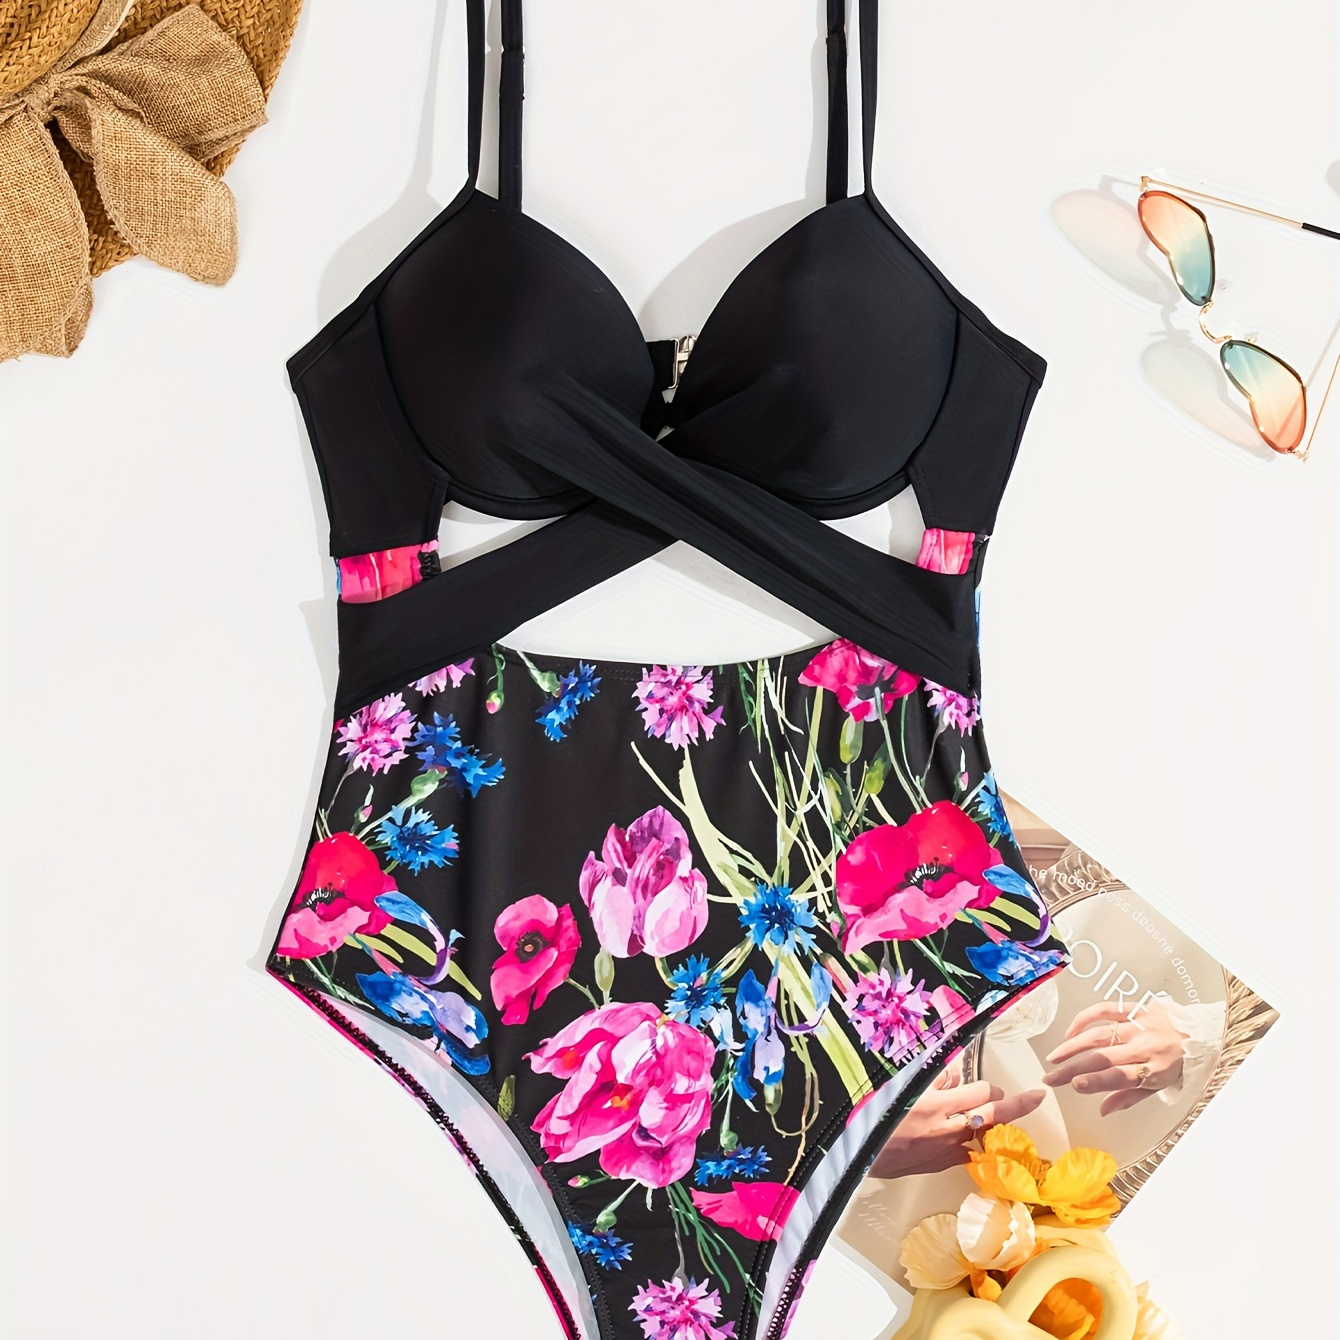 

Floral Print Criss Cross Spaghetti Strap One-piece Swimsuit, Cut Out Stretchy Elegant Bathing Suits, Women's Swimwear & Clothing